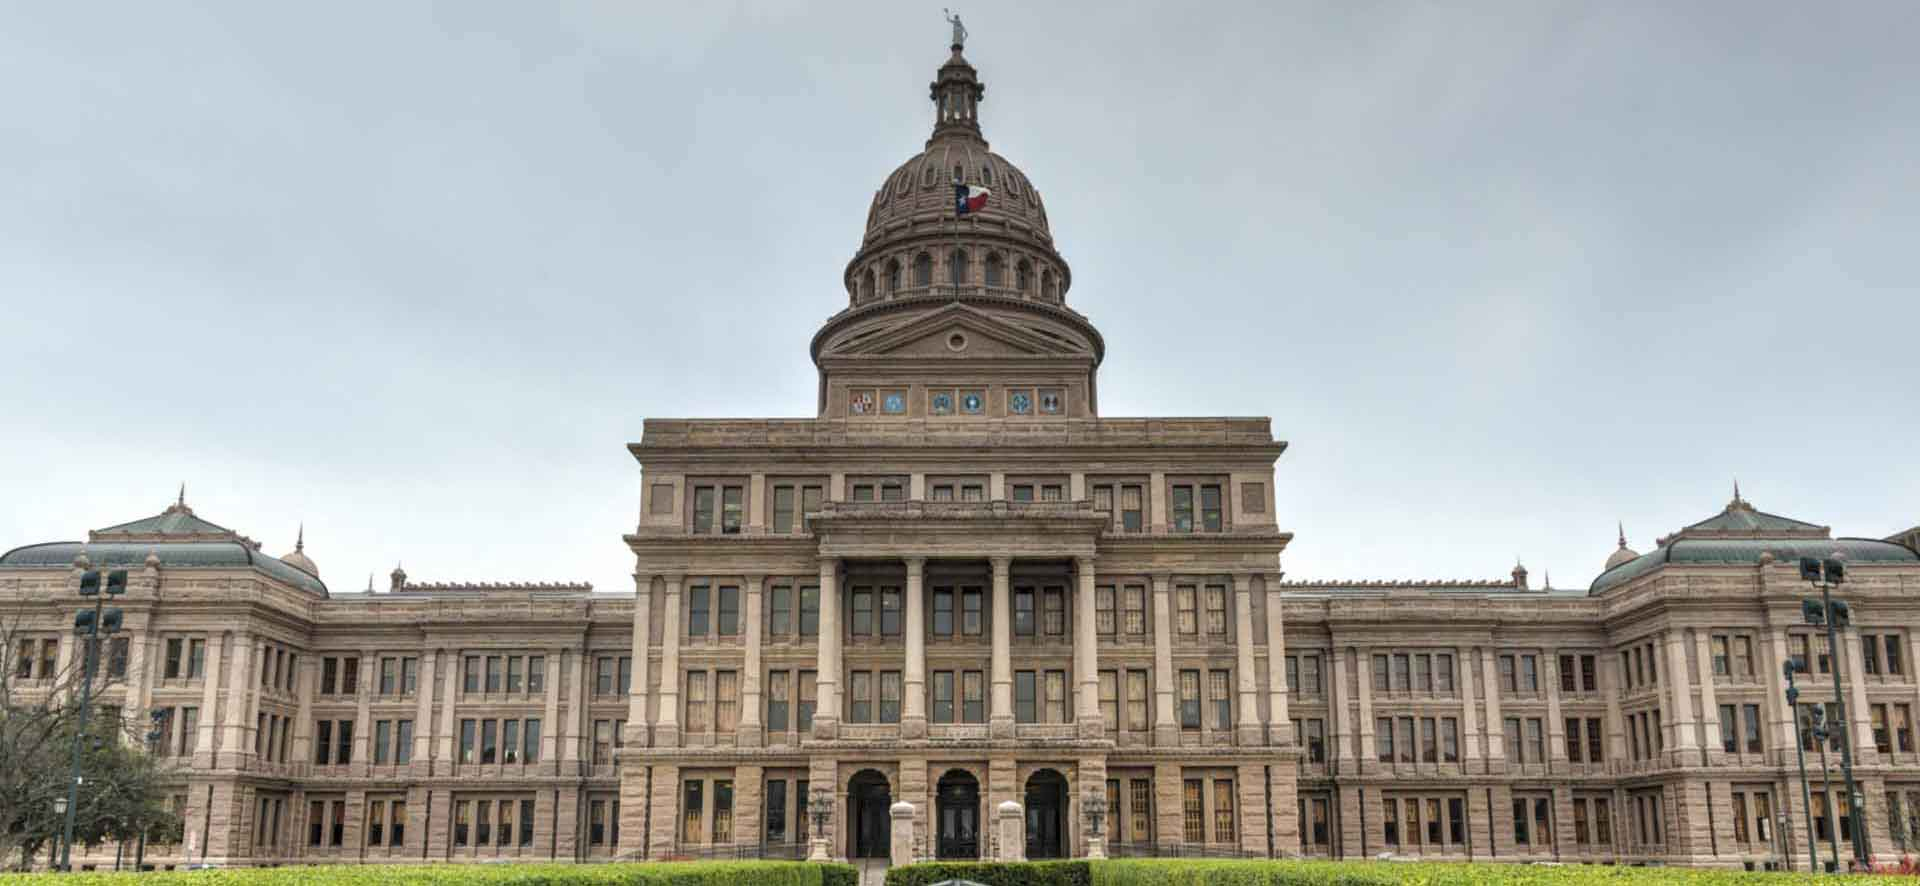 Texas' state capitol building